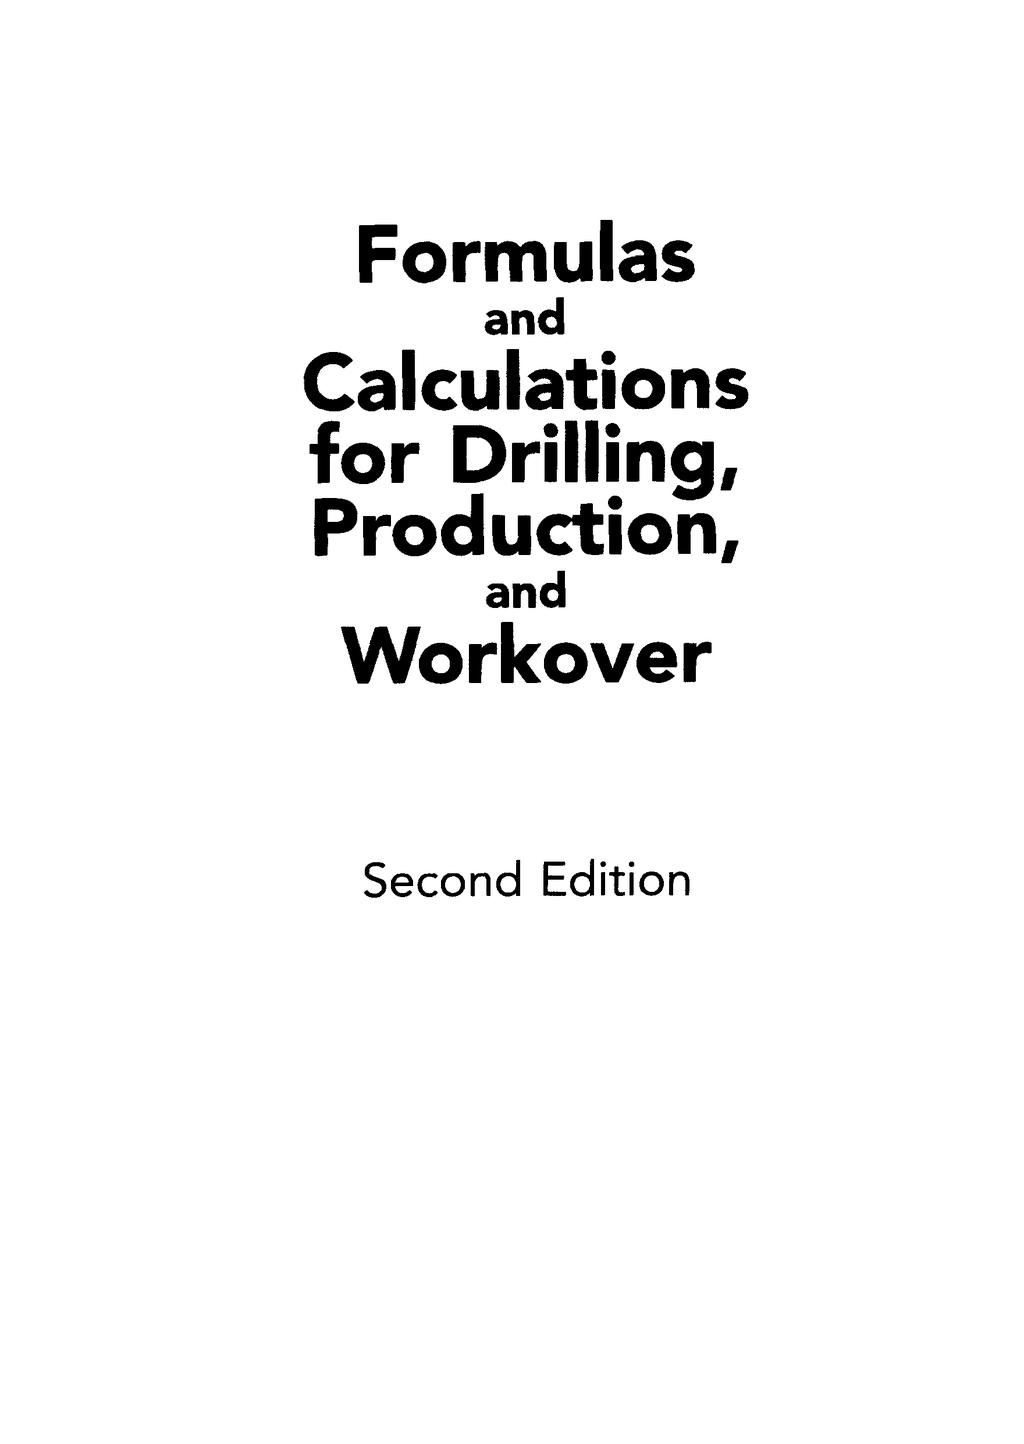 Formulas and Calculations for Drilling,